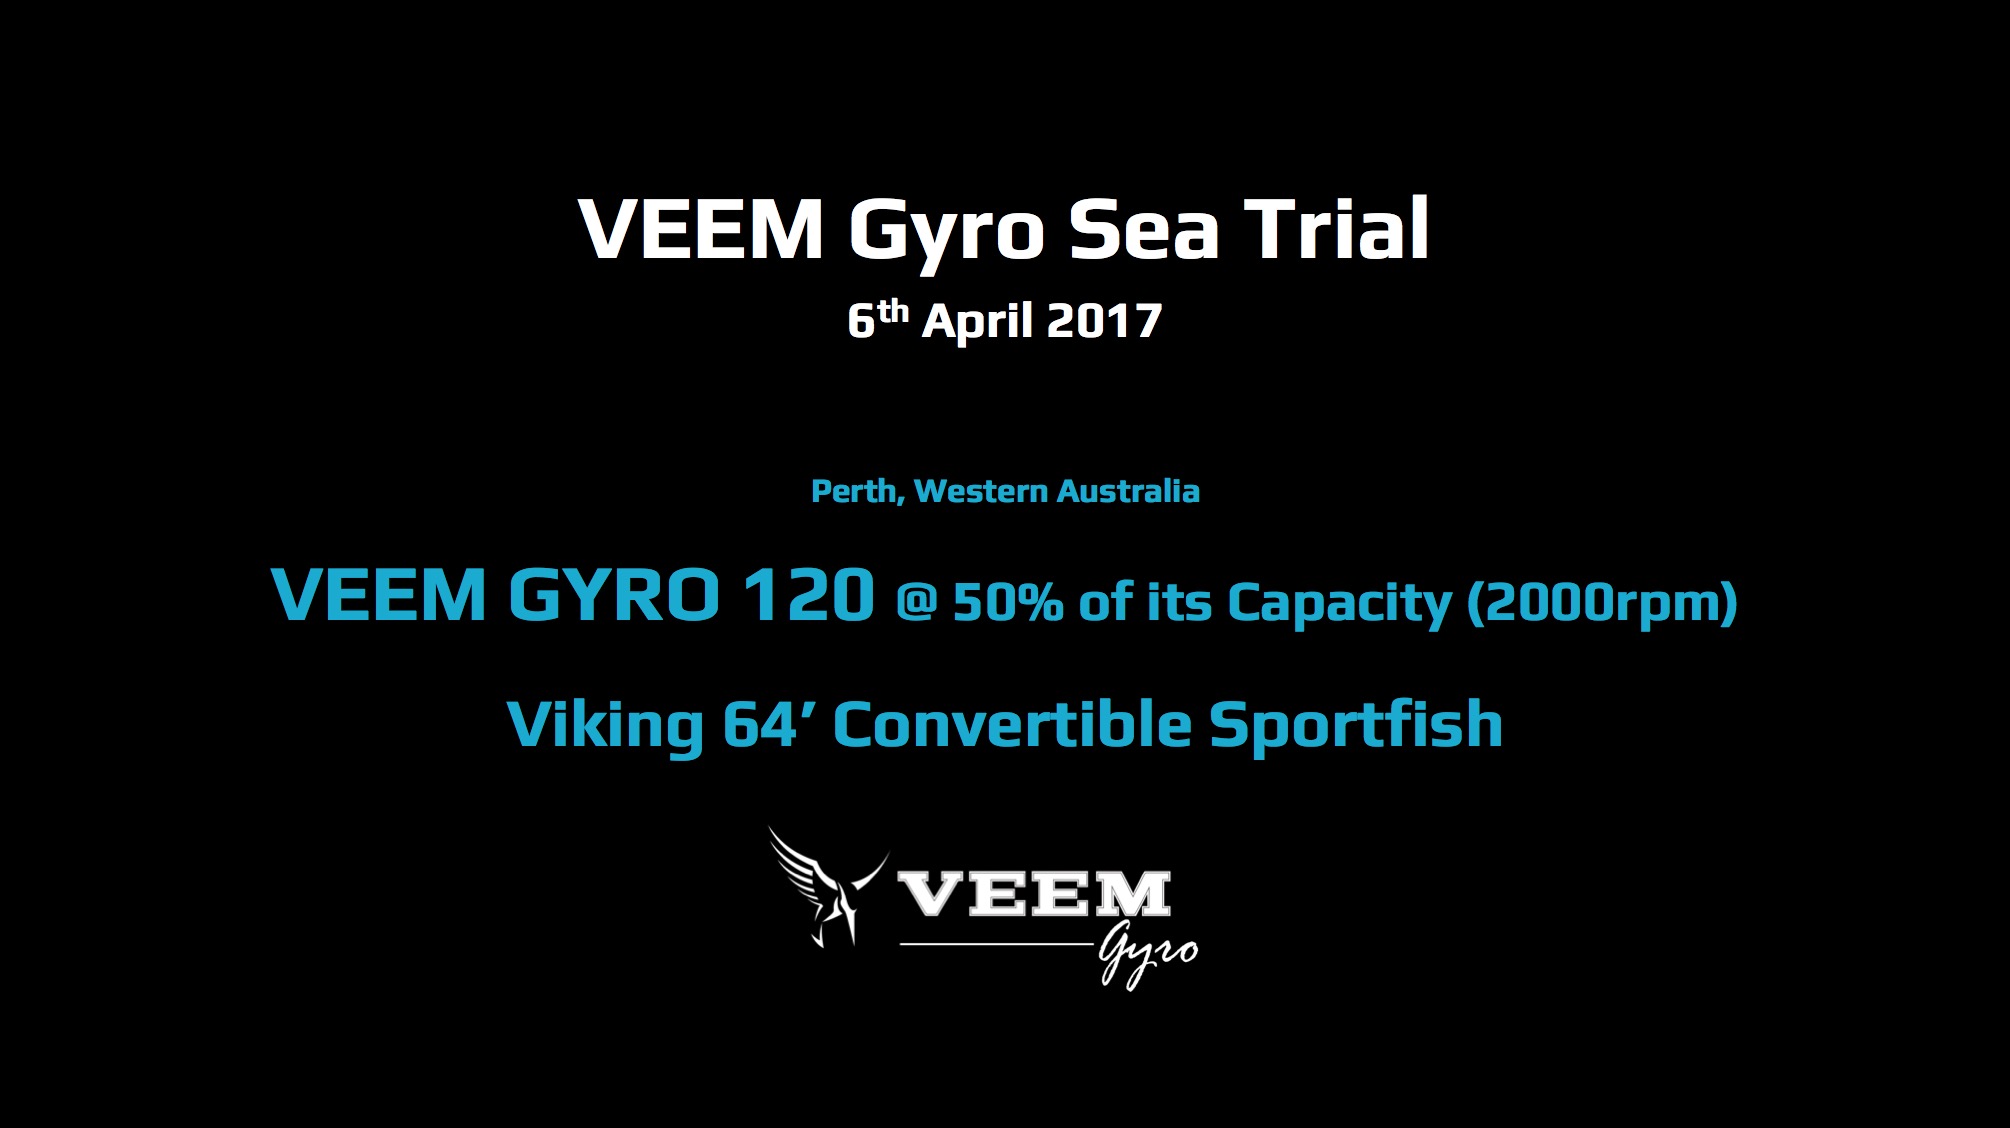 Another amazing sea trial result for the VG120